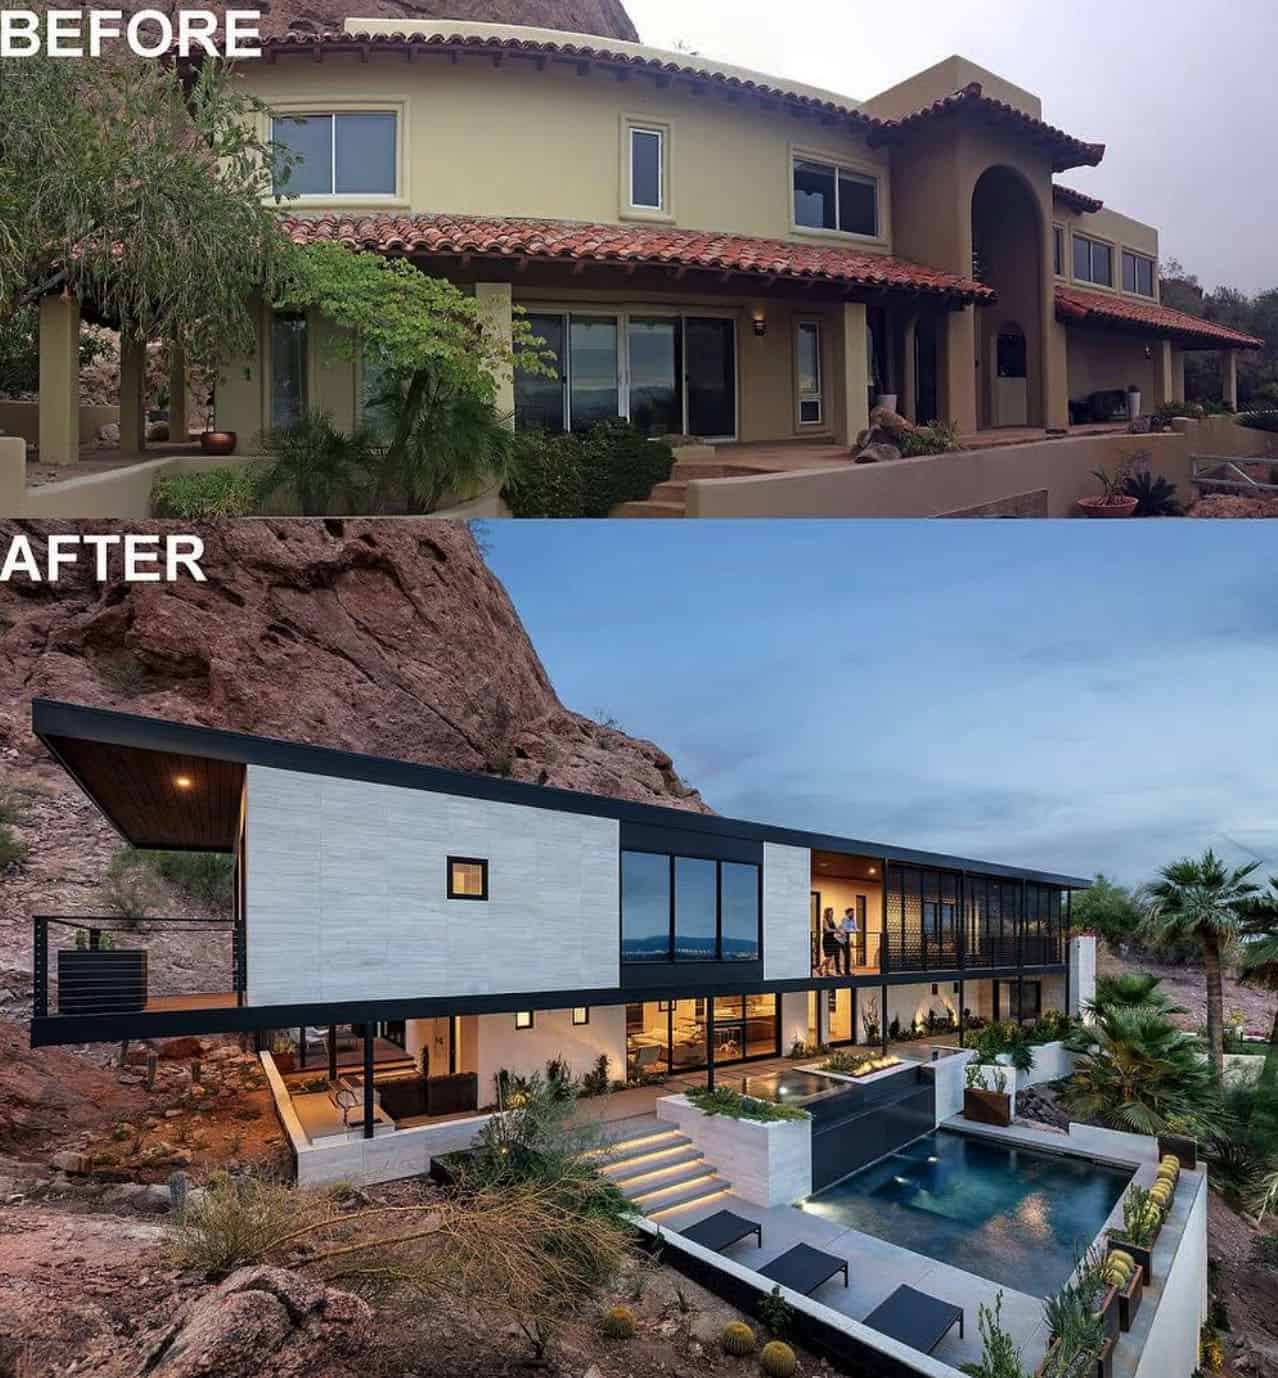 modern-mountainside-home-before-after